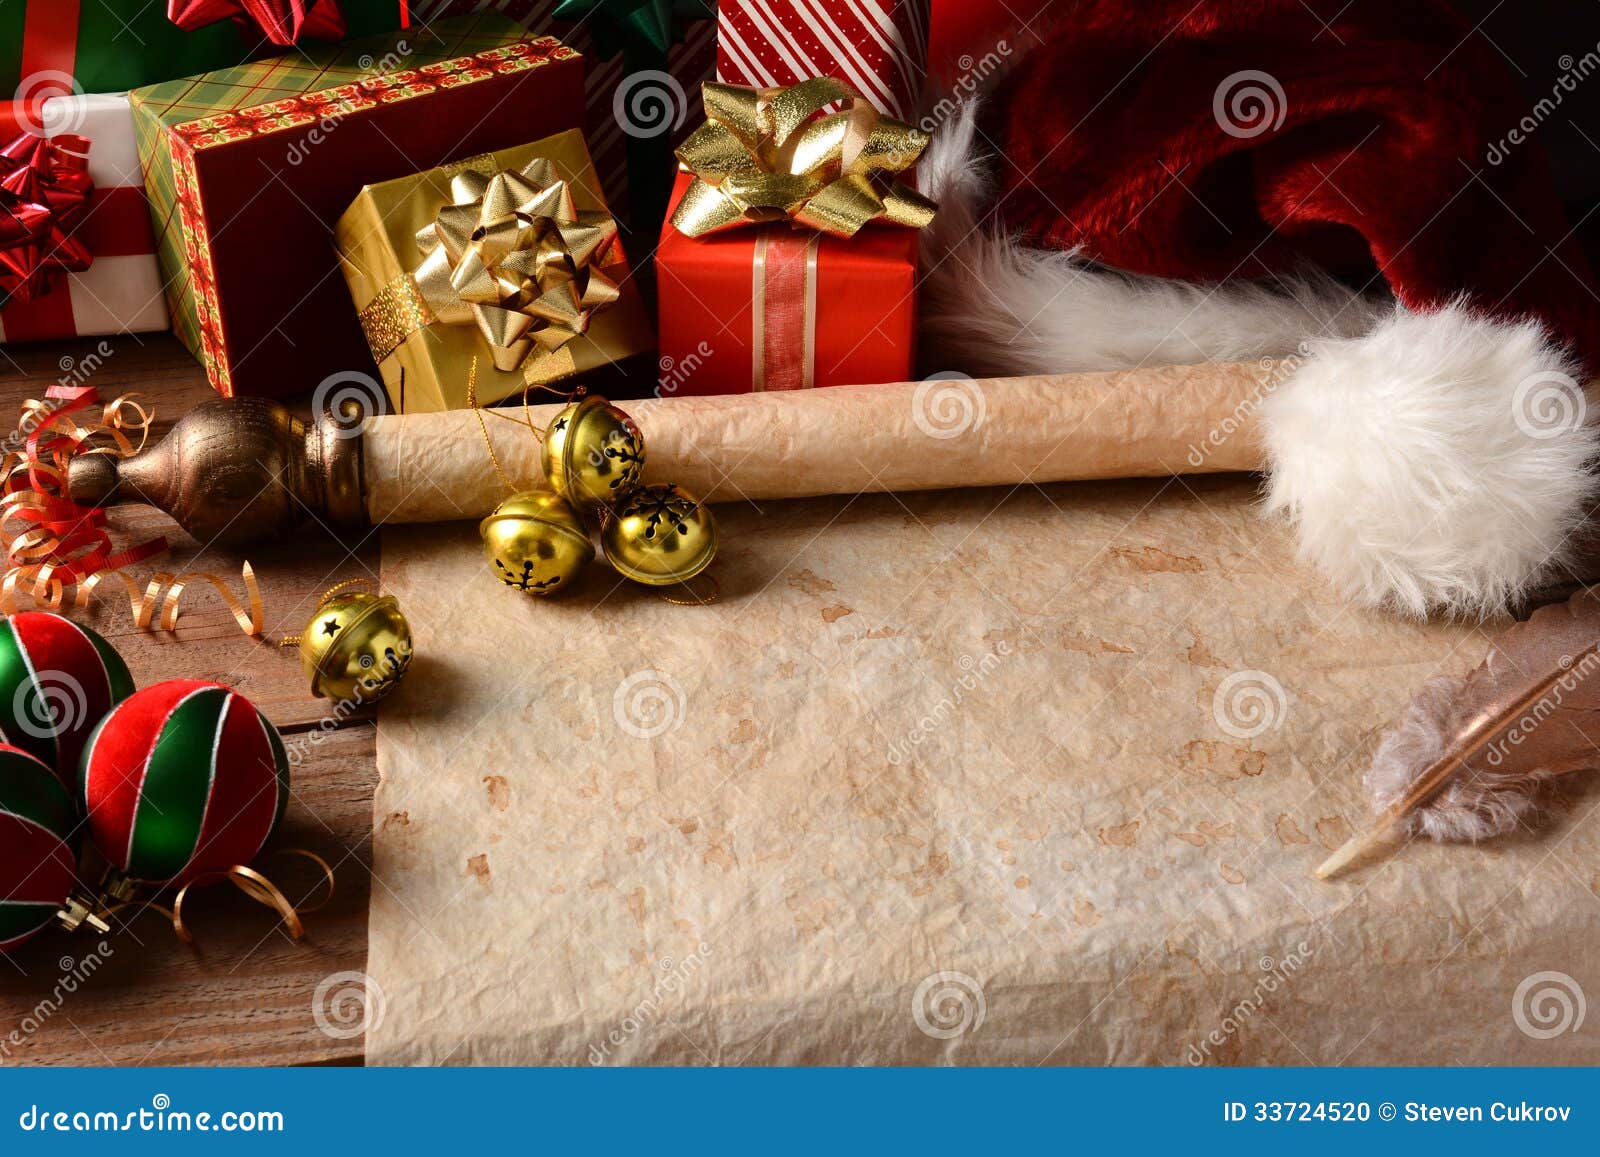 Parchment Paper Christmas: Over 3,421 Royalty-Free Licensable